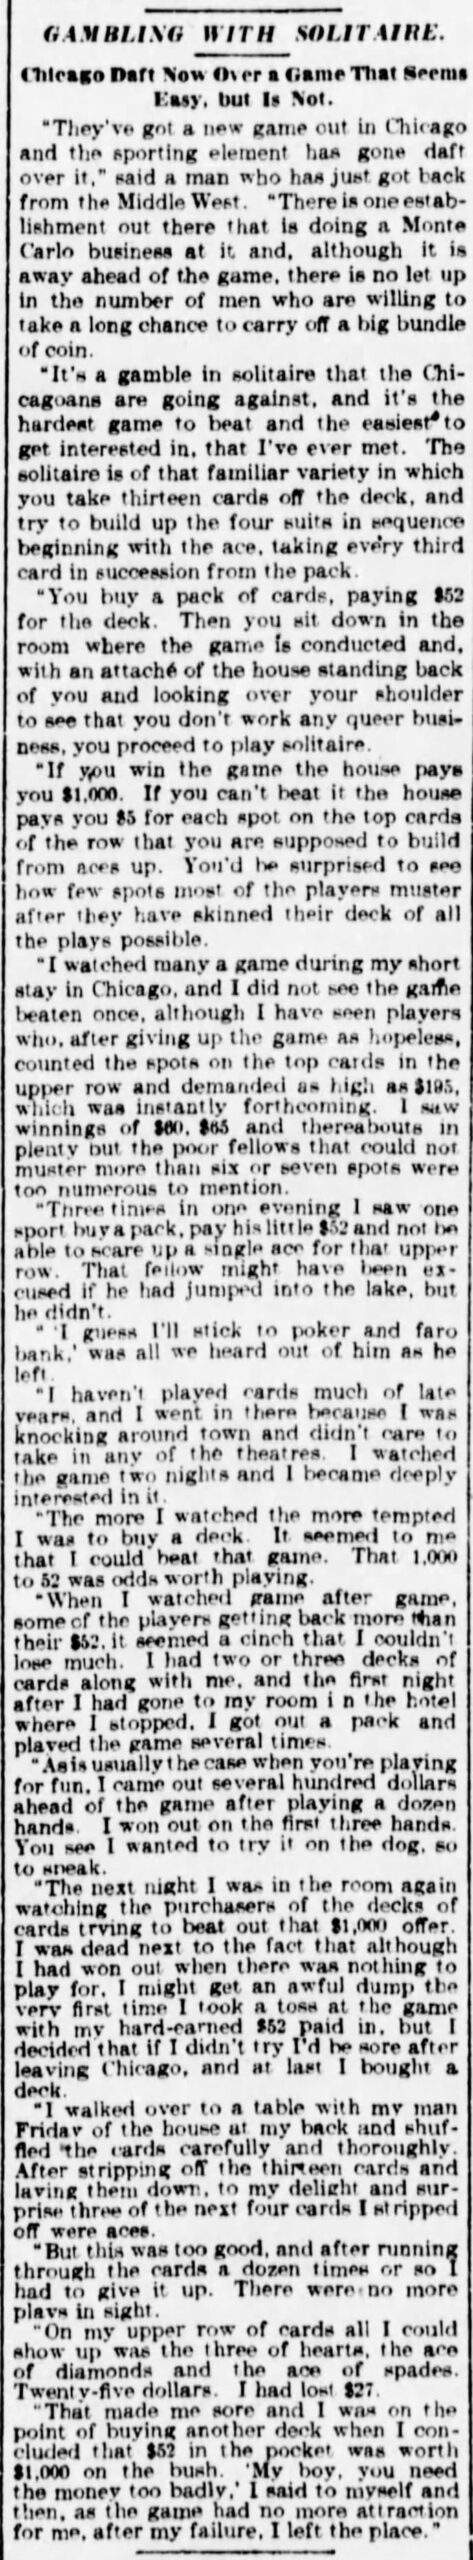 Gambling with Solitaire - Chicago Daft Now over a game that seems easy but is not - The Sun New York - 1902